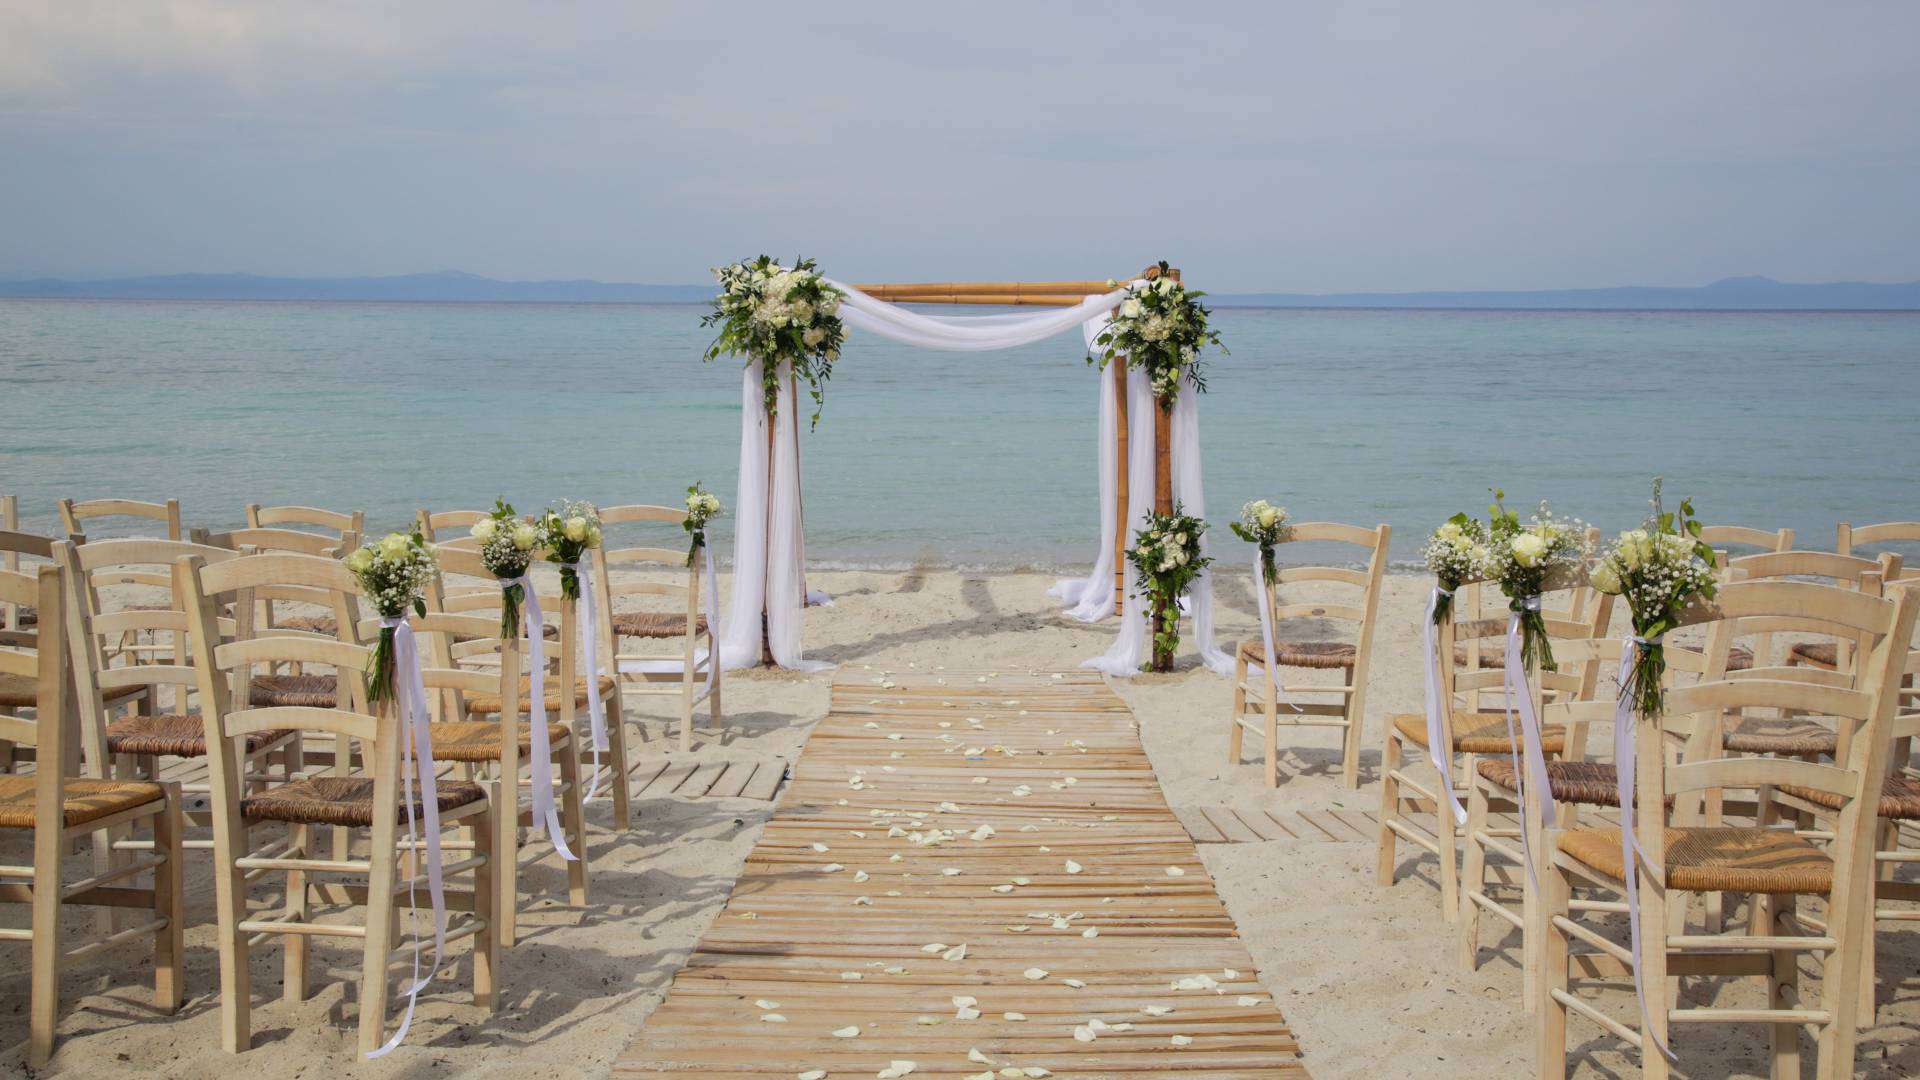 how do you choose the right venue for an outdoor wedding